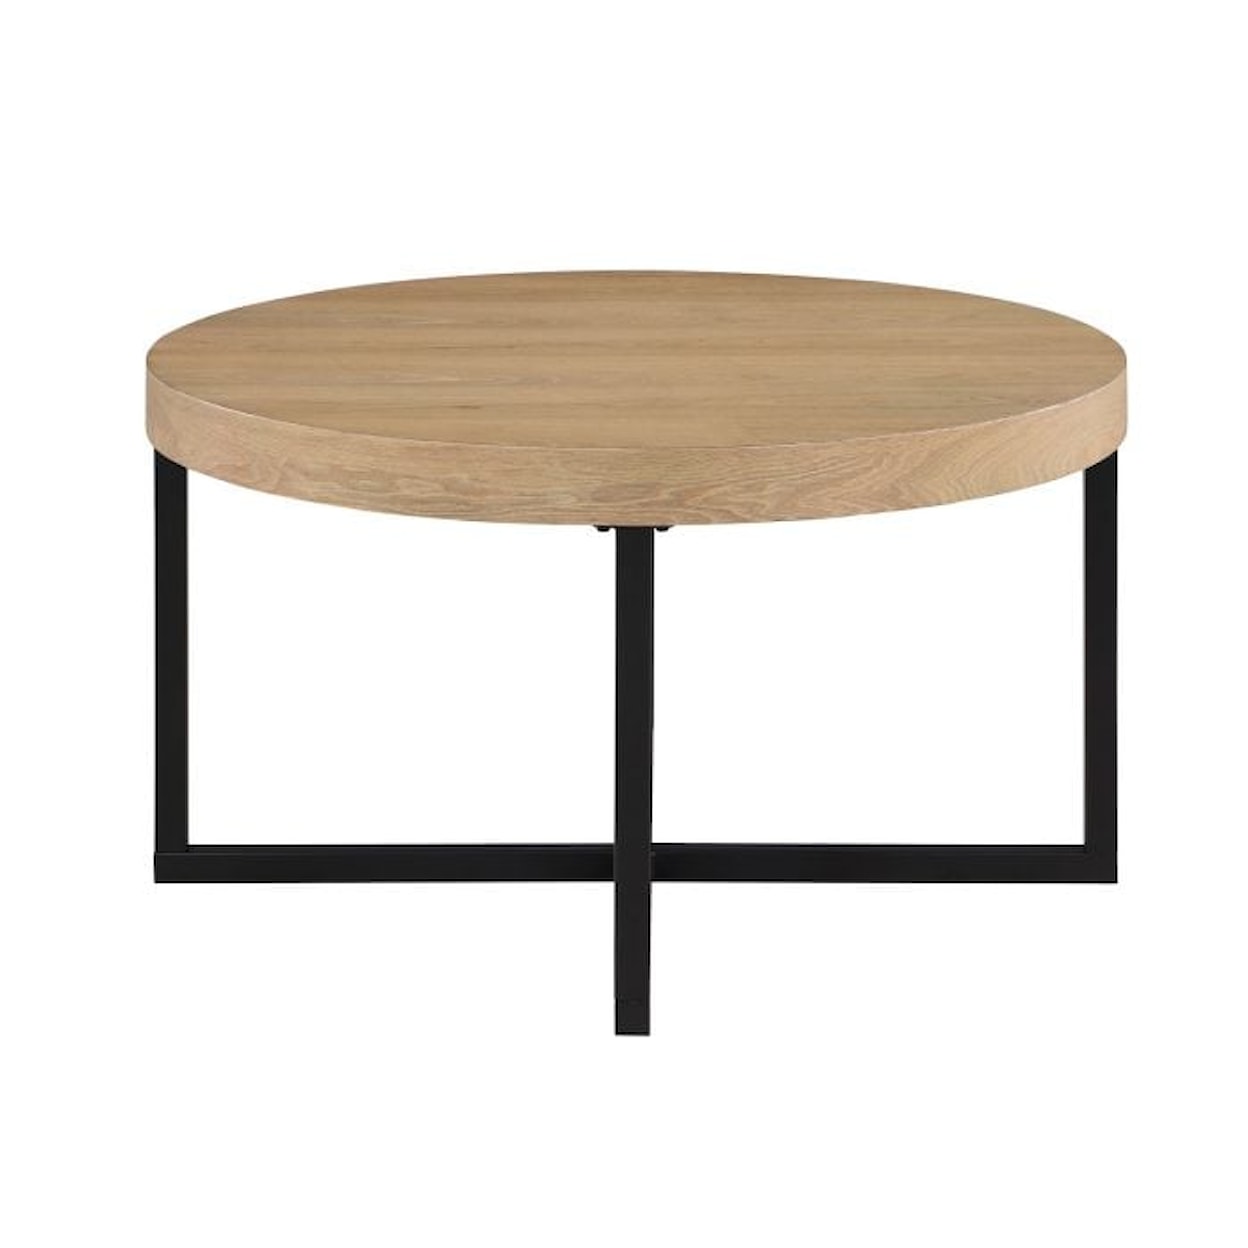 Steve Silver Magnolia YUCATAN NATURAL COFFEE TABLE WITH | 4 STOOLS